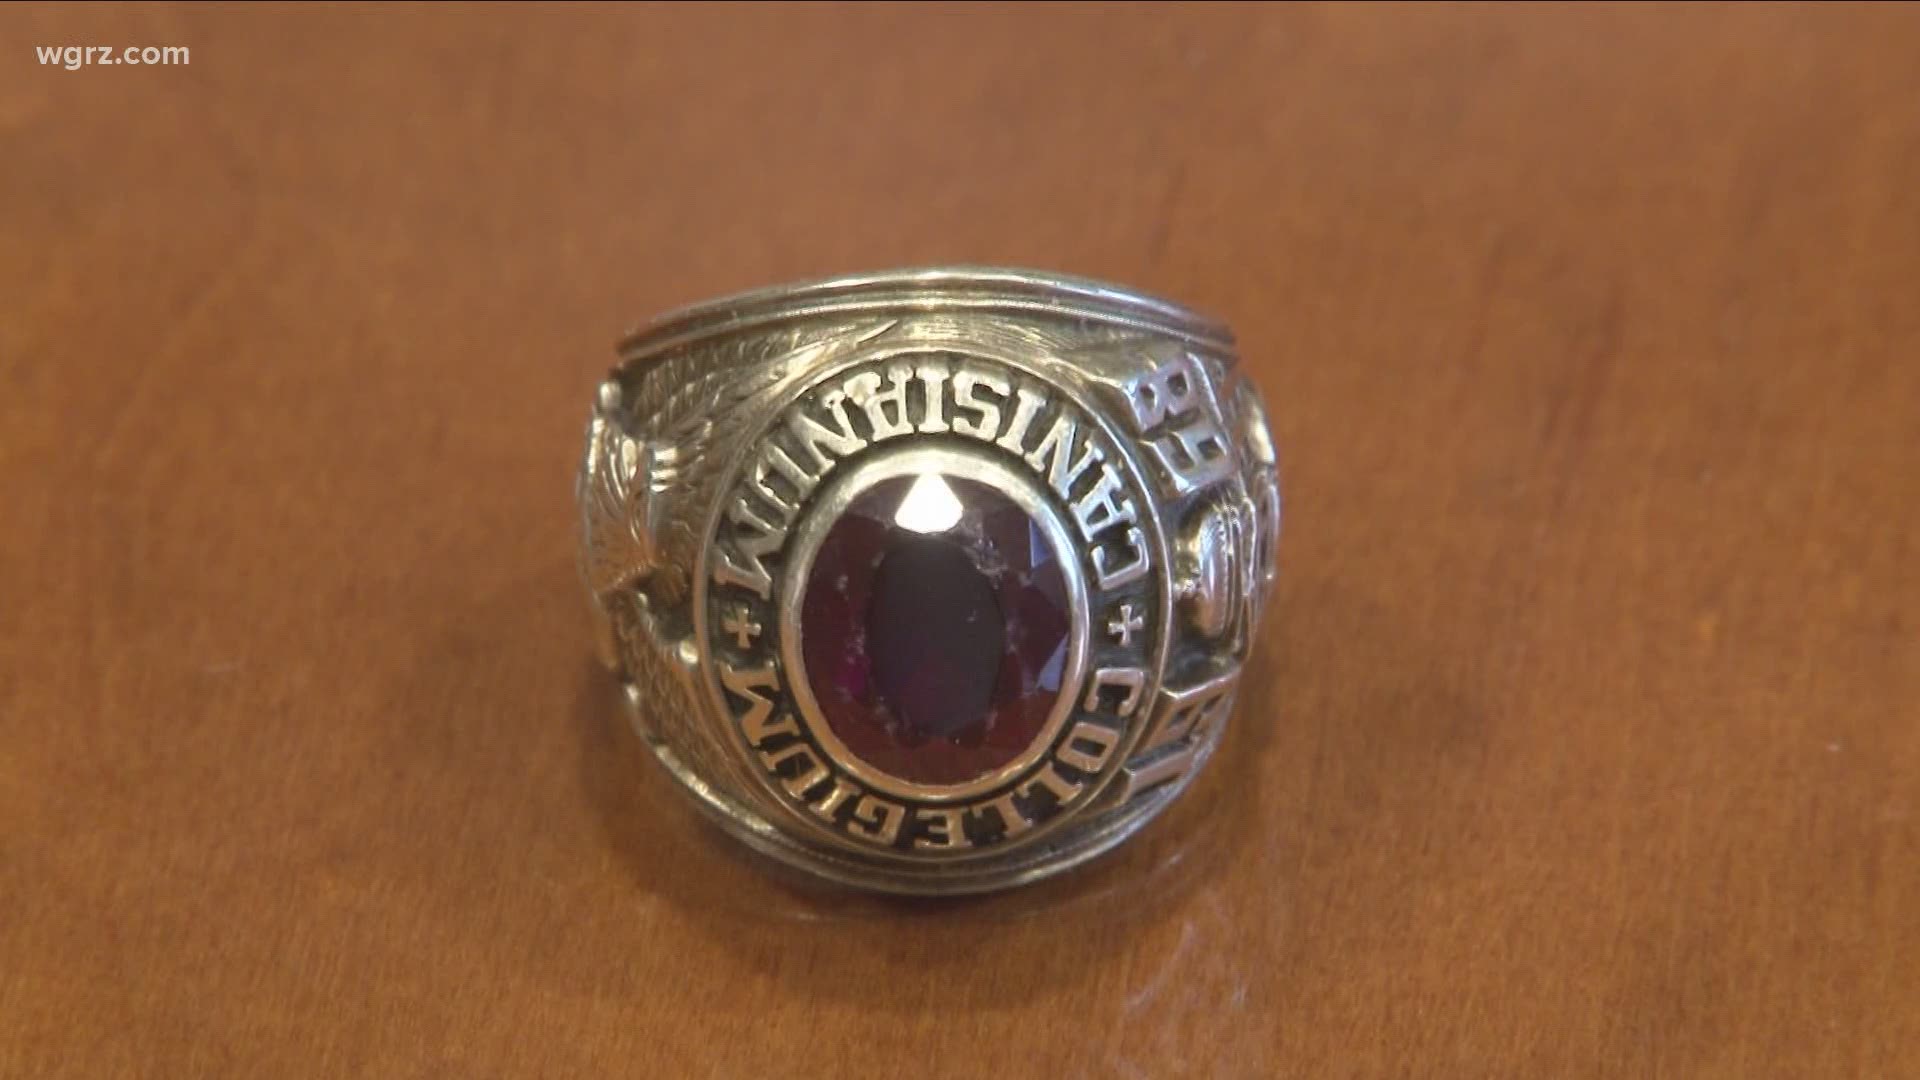 "A landscaper in El Paso eventually found the ring."
30 years ago.. that landscaper gave the ring to the Nunez family.. who are currently residing in his old home